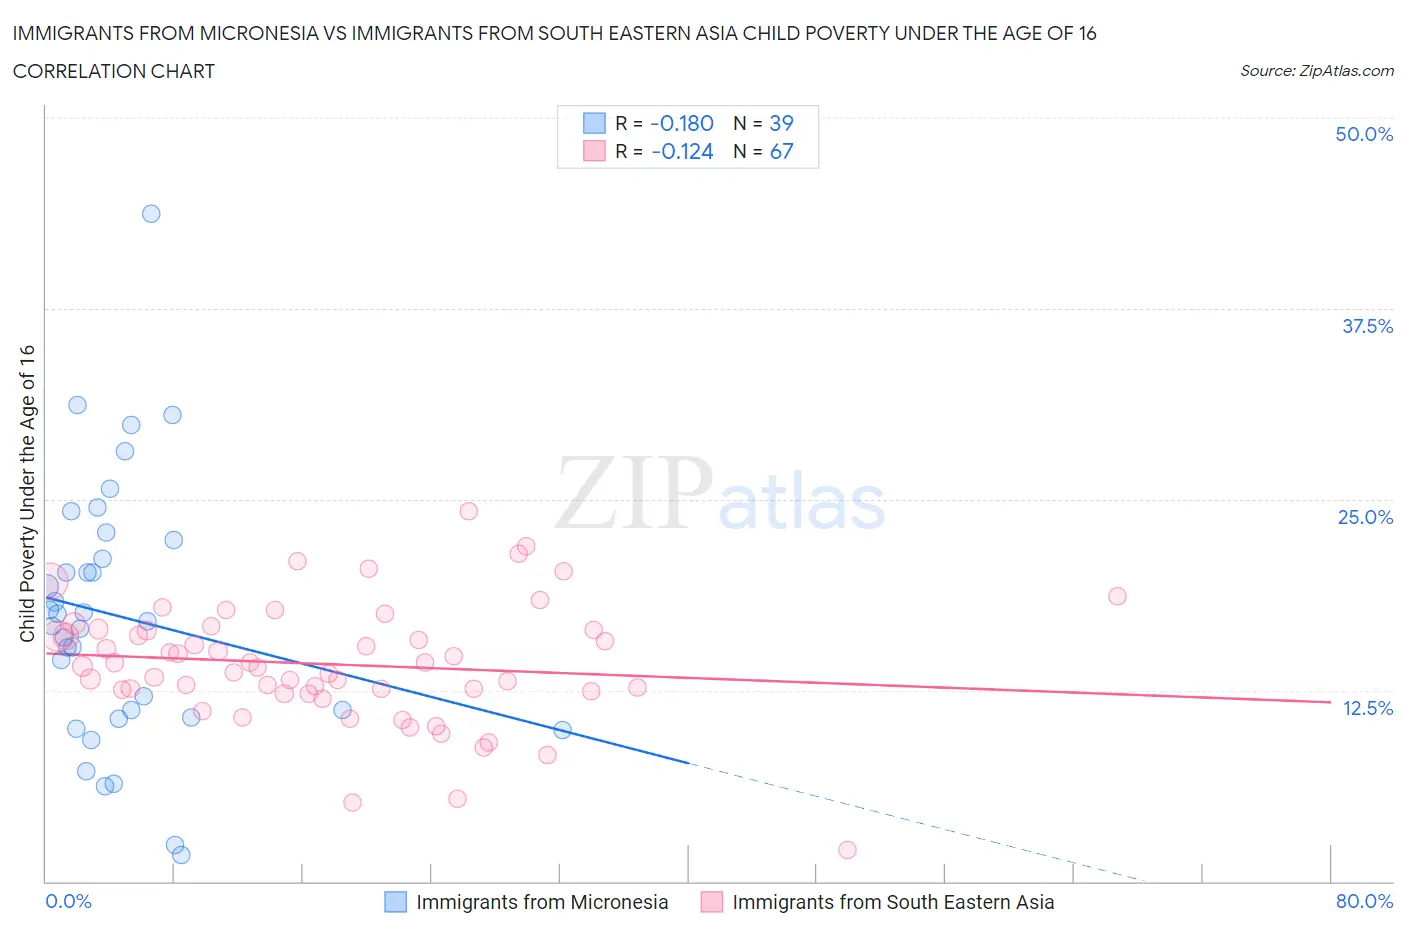 Immigrants from Micronesia vs Immigrants from South Eastern Asia Child Poverty Under the Age of 16